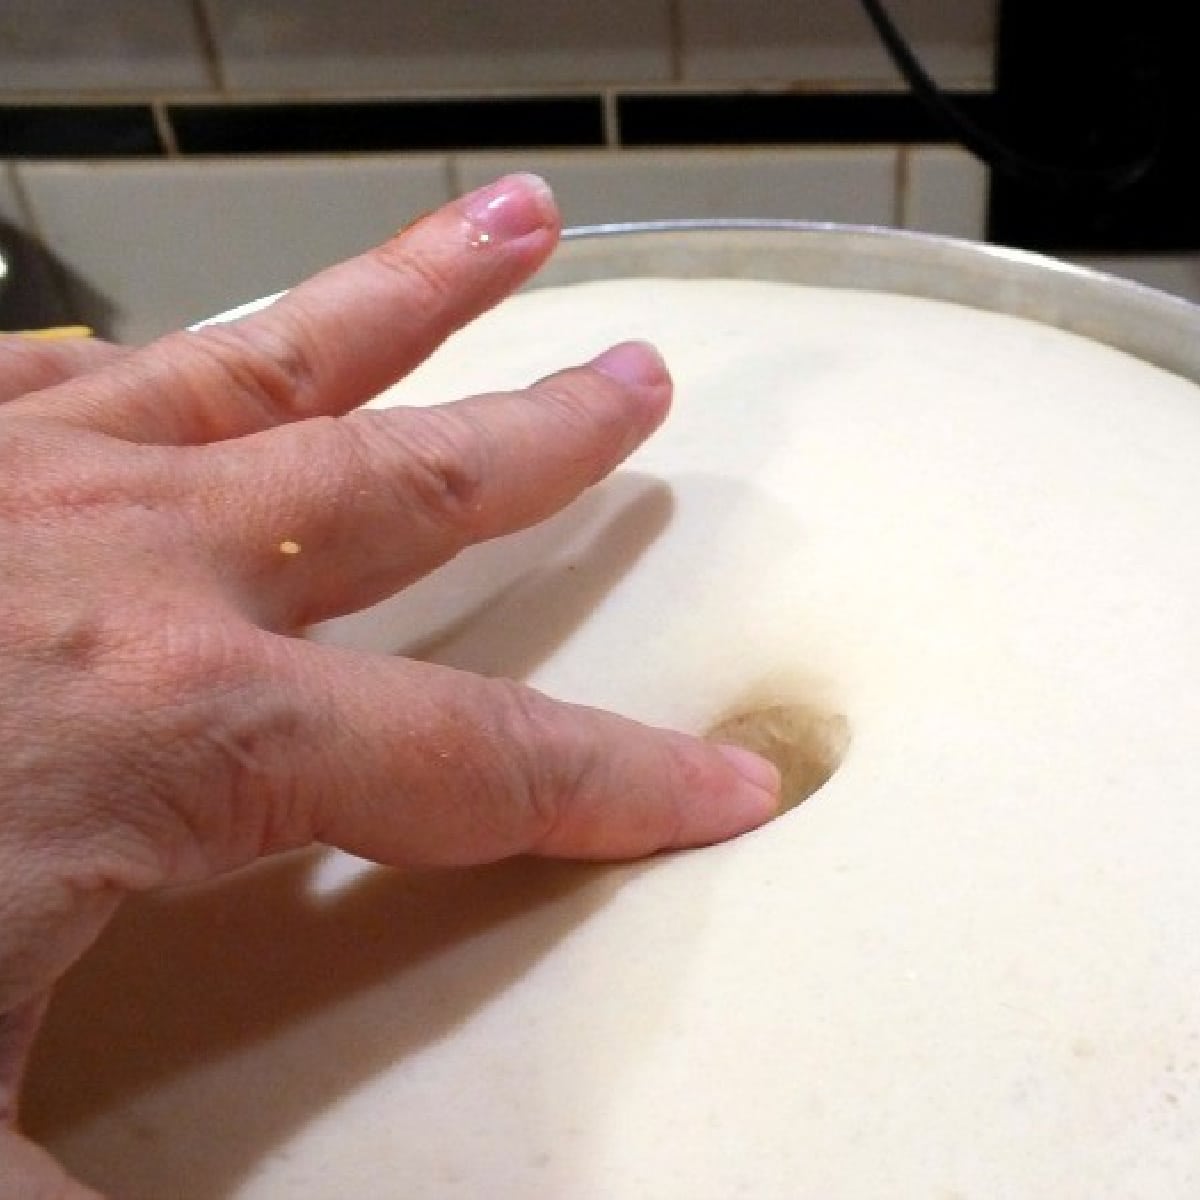 Pushing a finger in bread dough to check if it's risen.